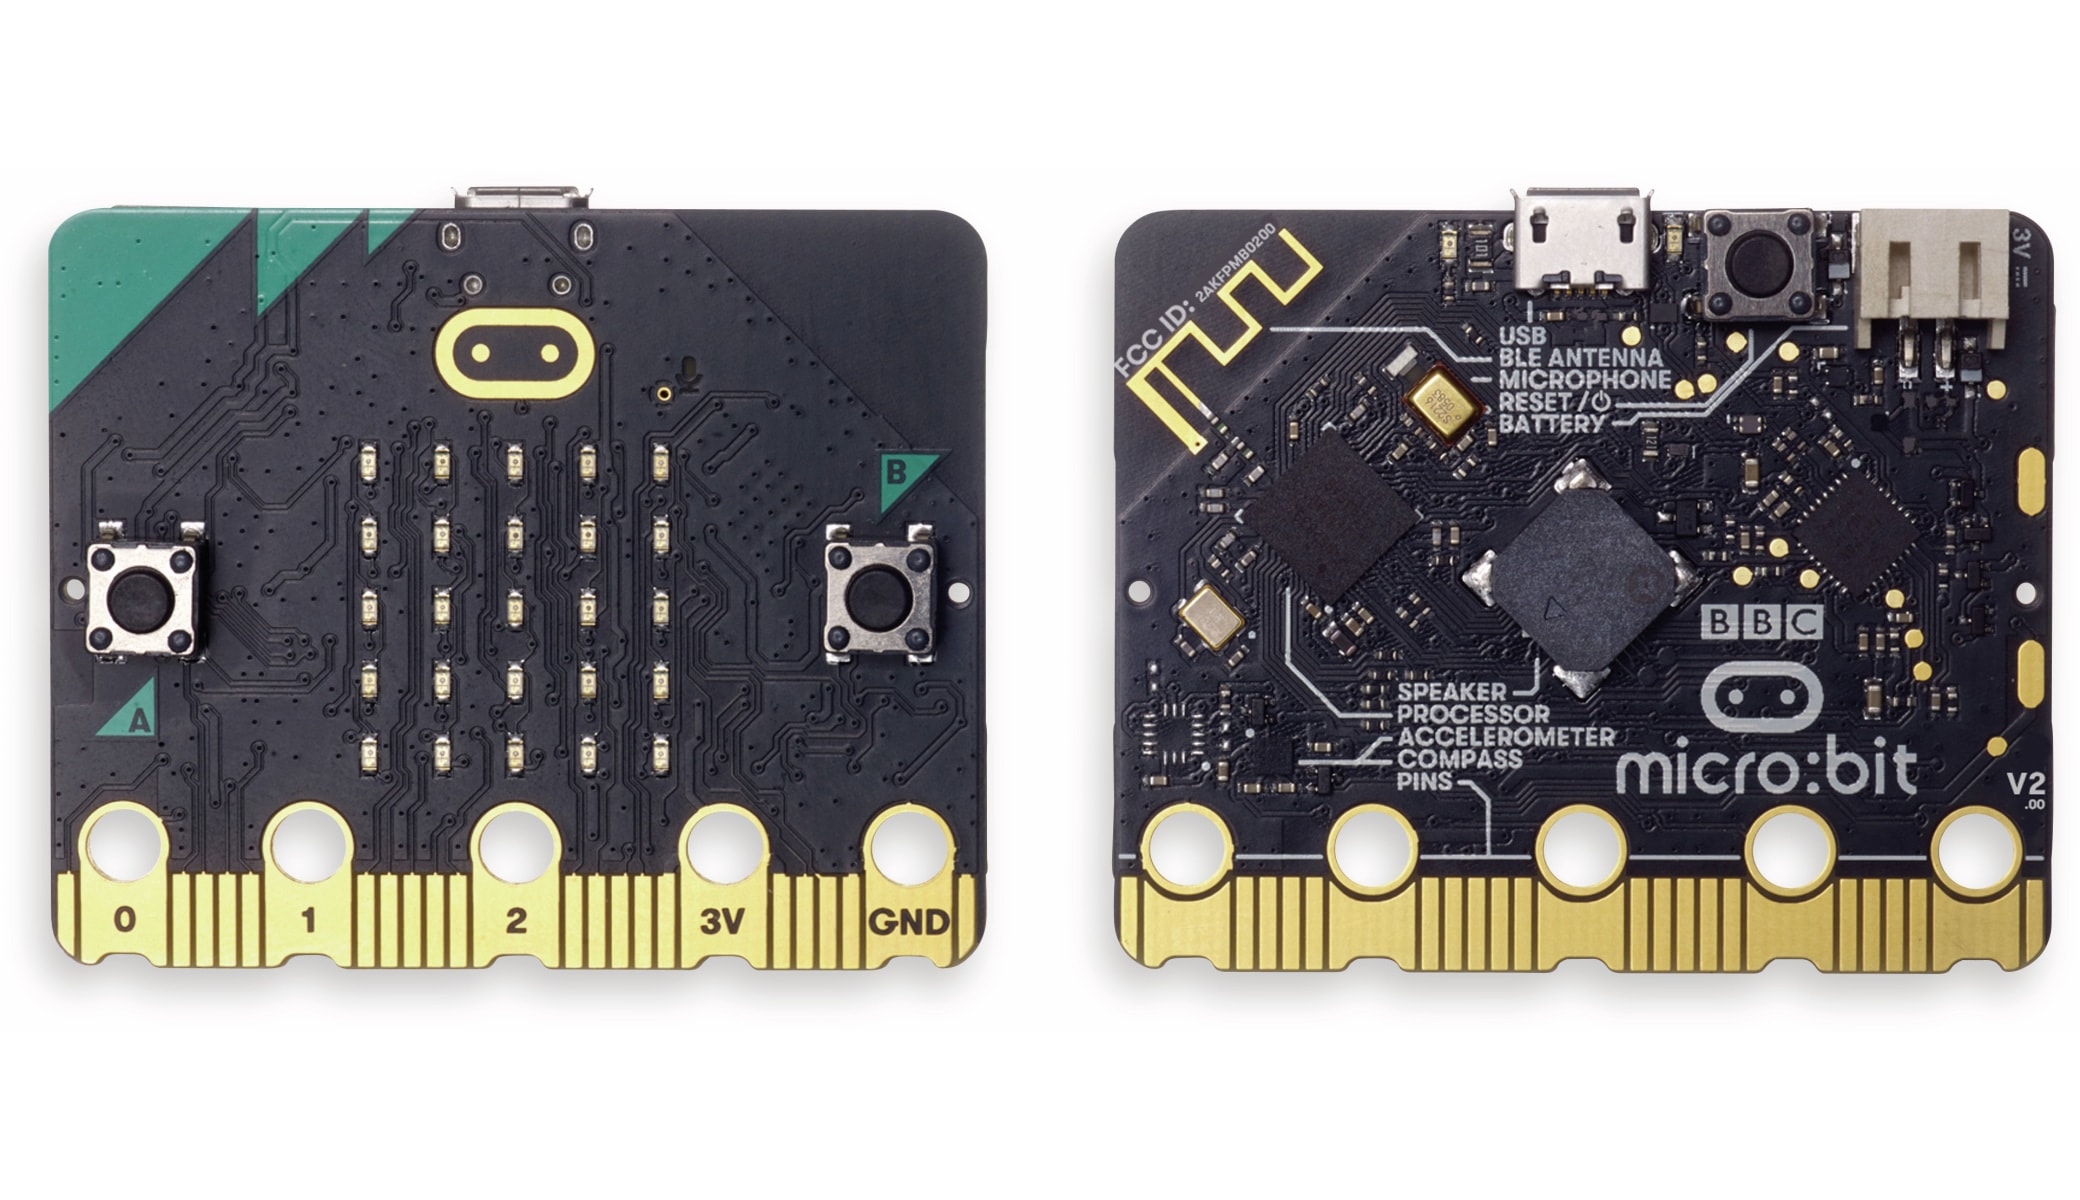 BBC MICRO:BIT Micro:bit, BBC Micro Bit 2 Go Set, MicroBit2GoBoxed